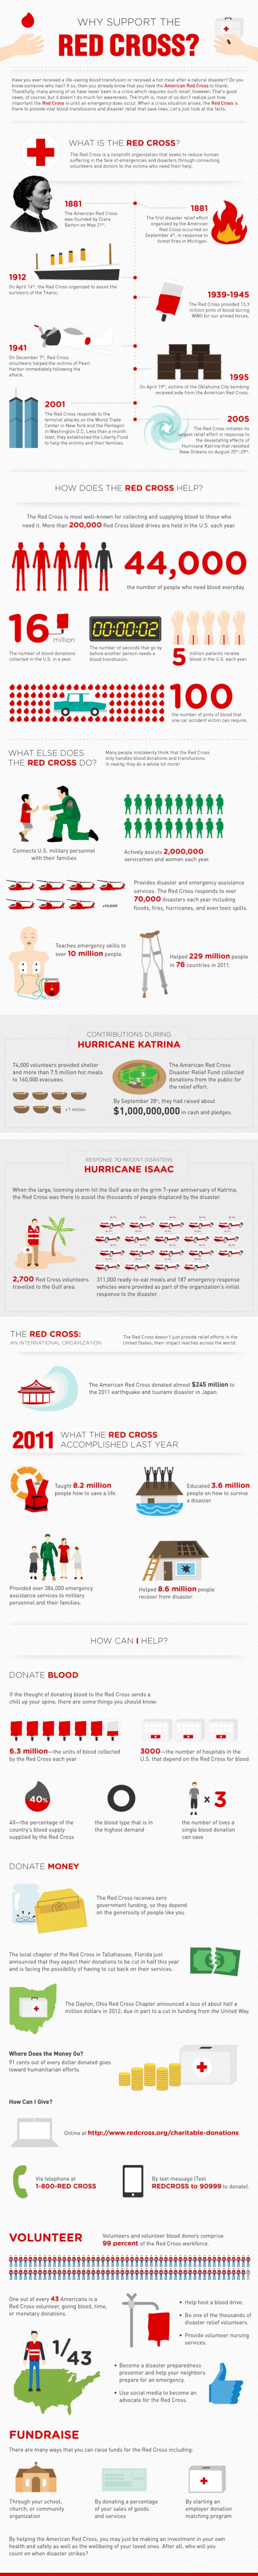 Infographic for Red Cross: Why Should You Support Them?